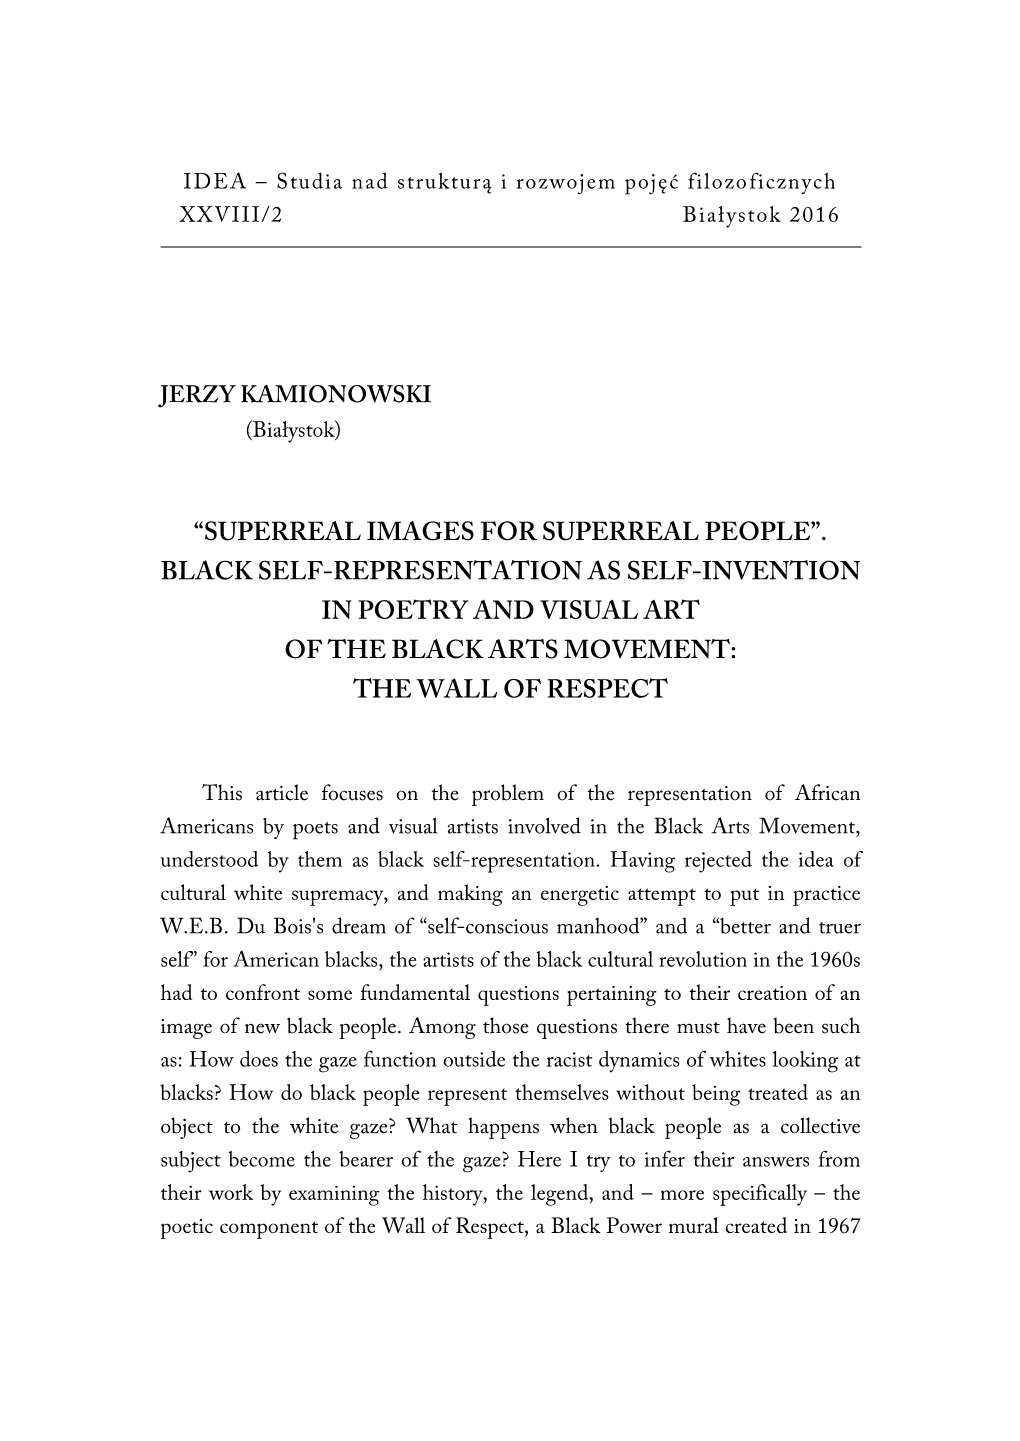 “Superreal Images for Superreal People”. Black Self-Representation As Self-Invention in Poetry and Visual Art of the Black Arts Movement: the Wall of Respect